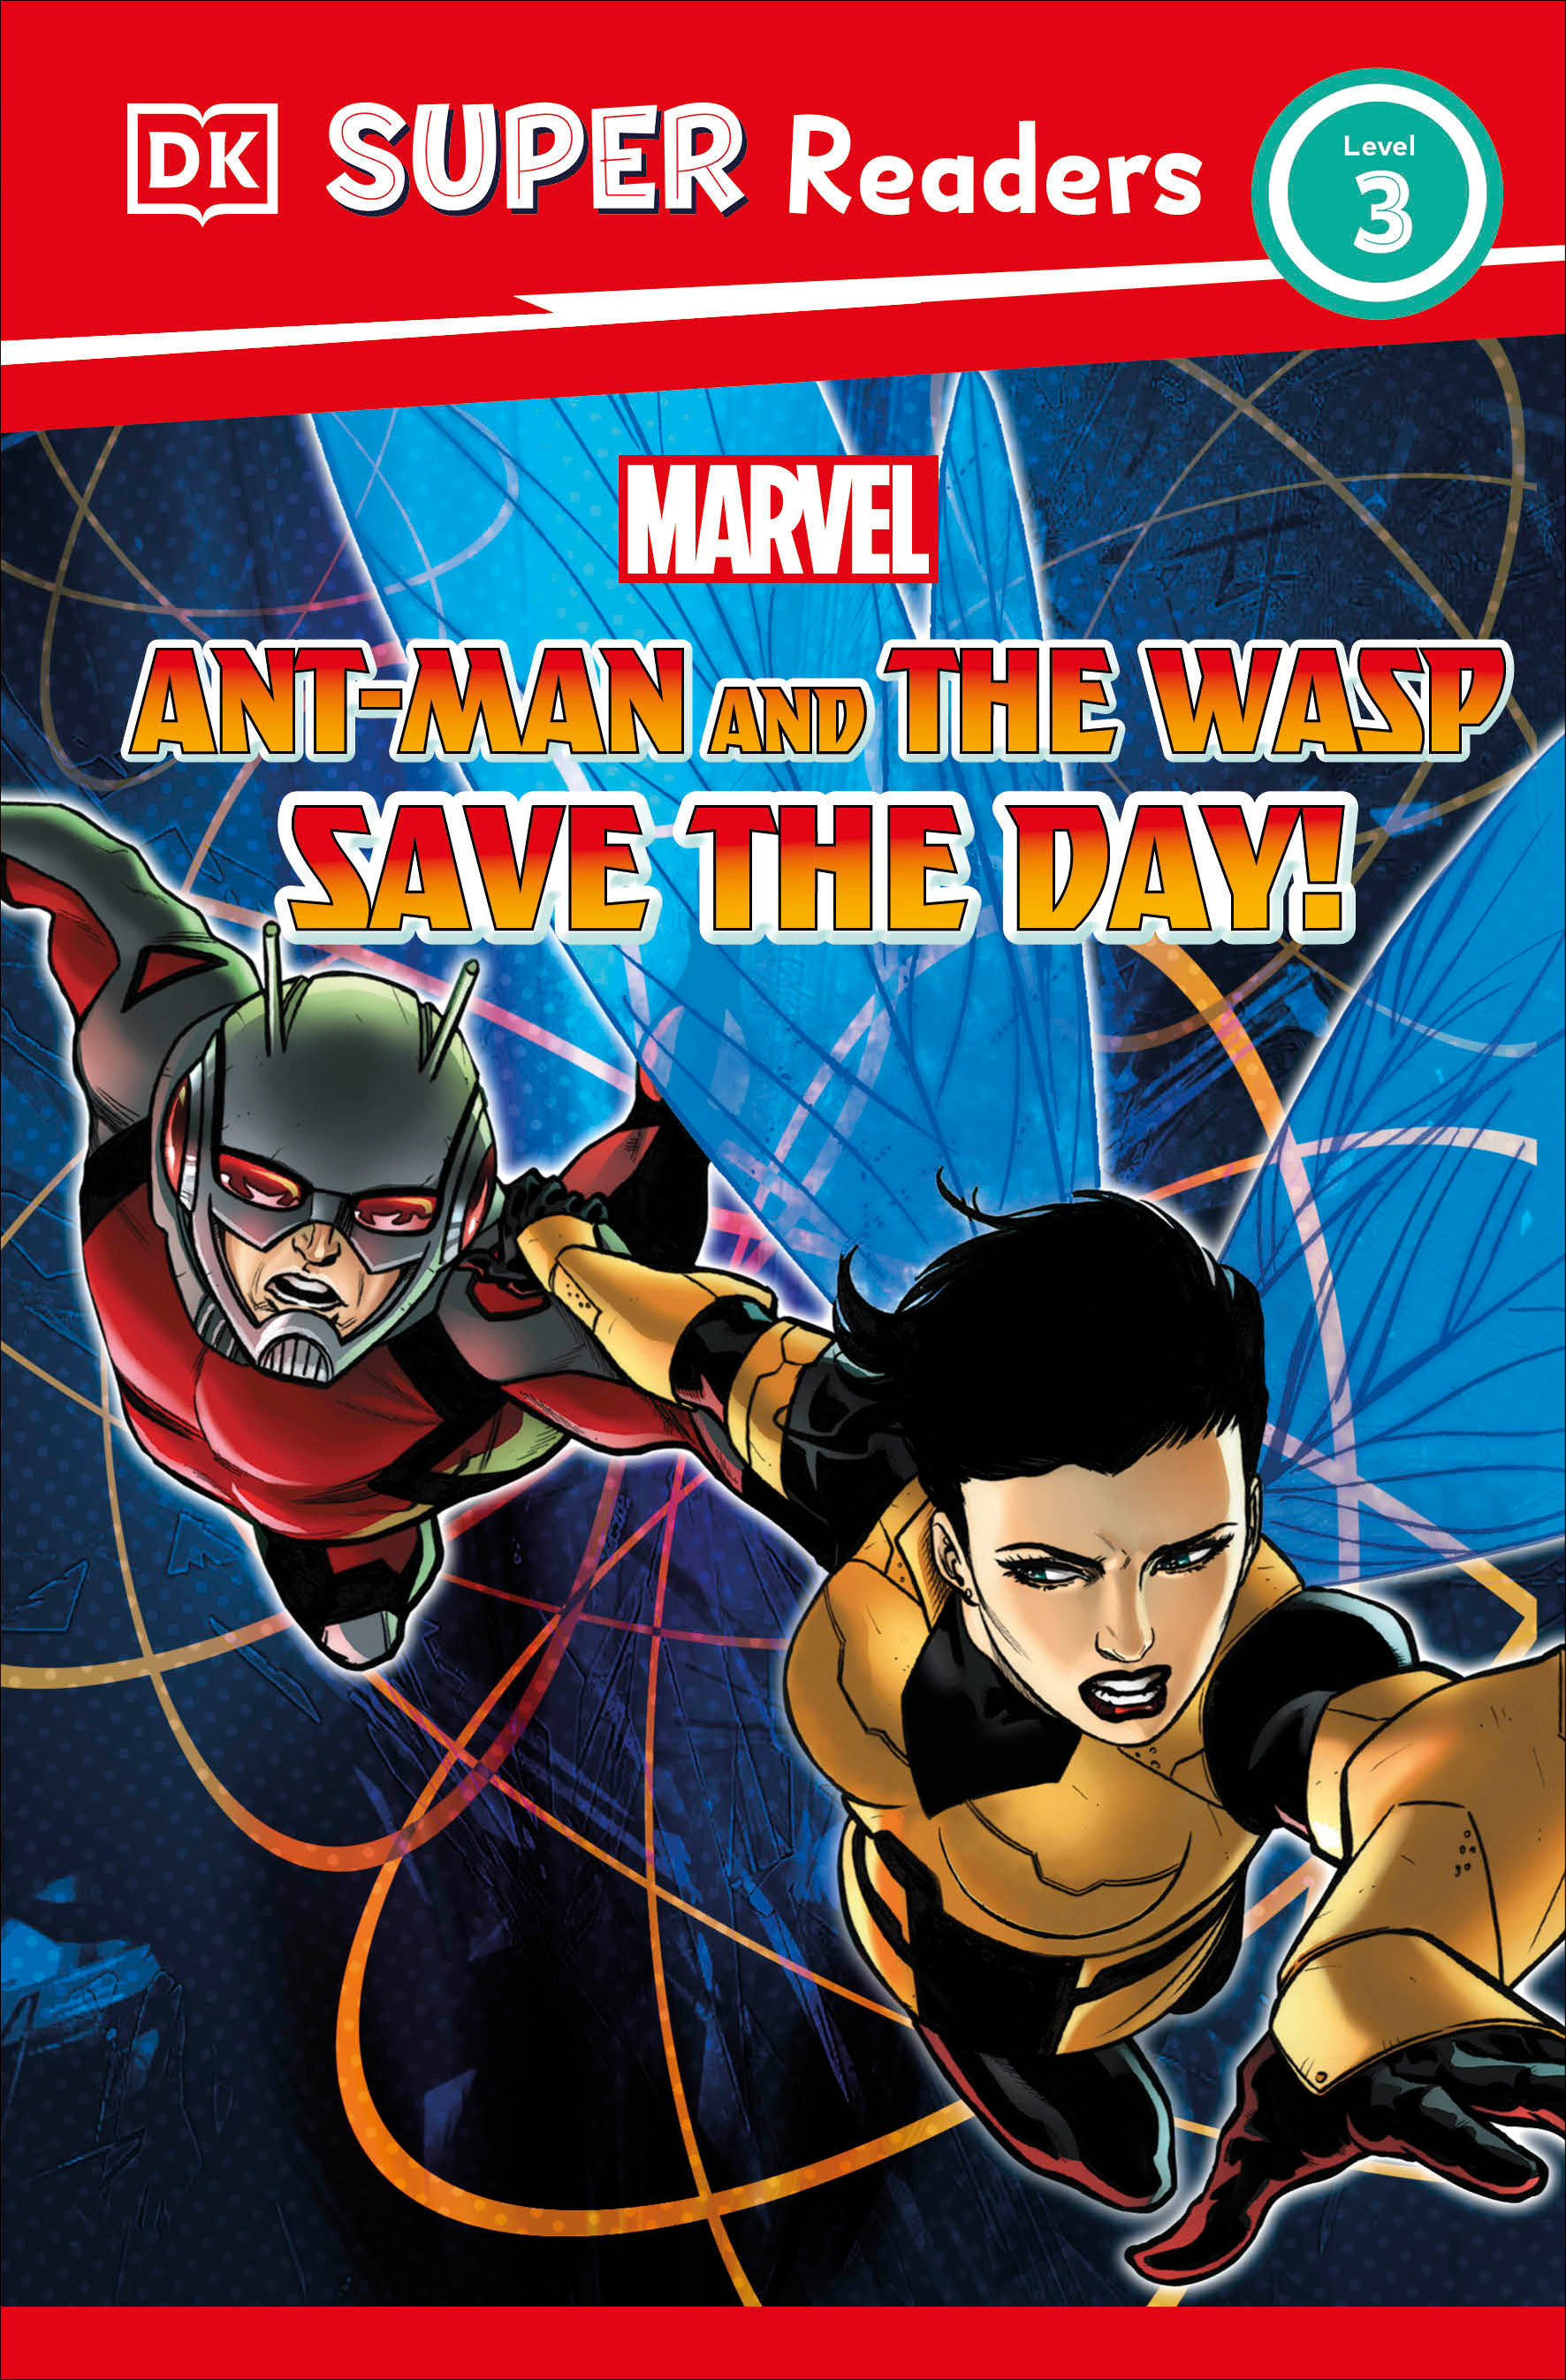 DK Super Readers Level 3 - Marvel Ant-Man and The Wasp Save the Day! | March, Julia